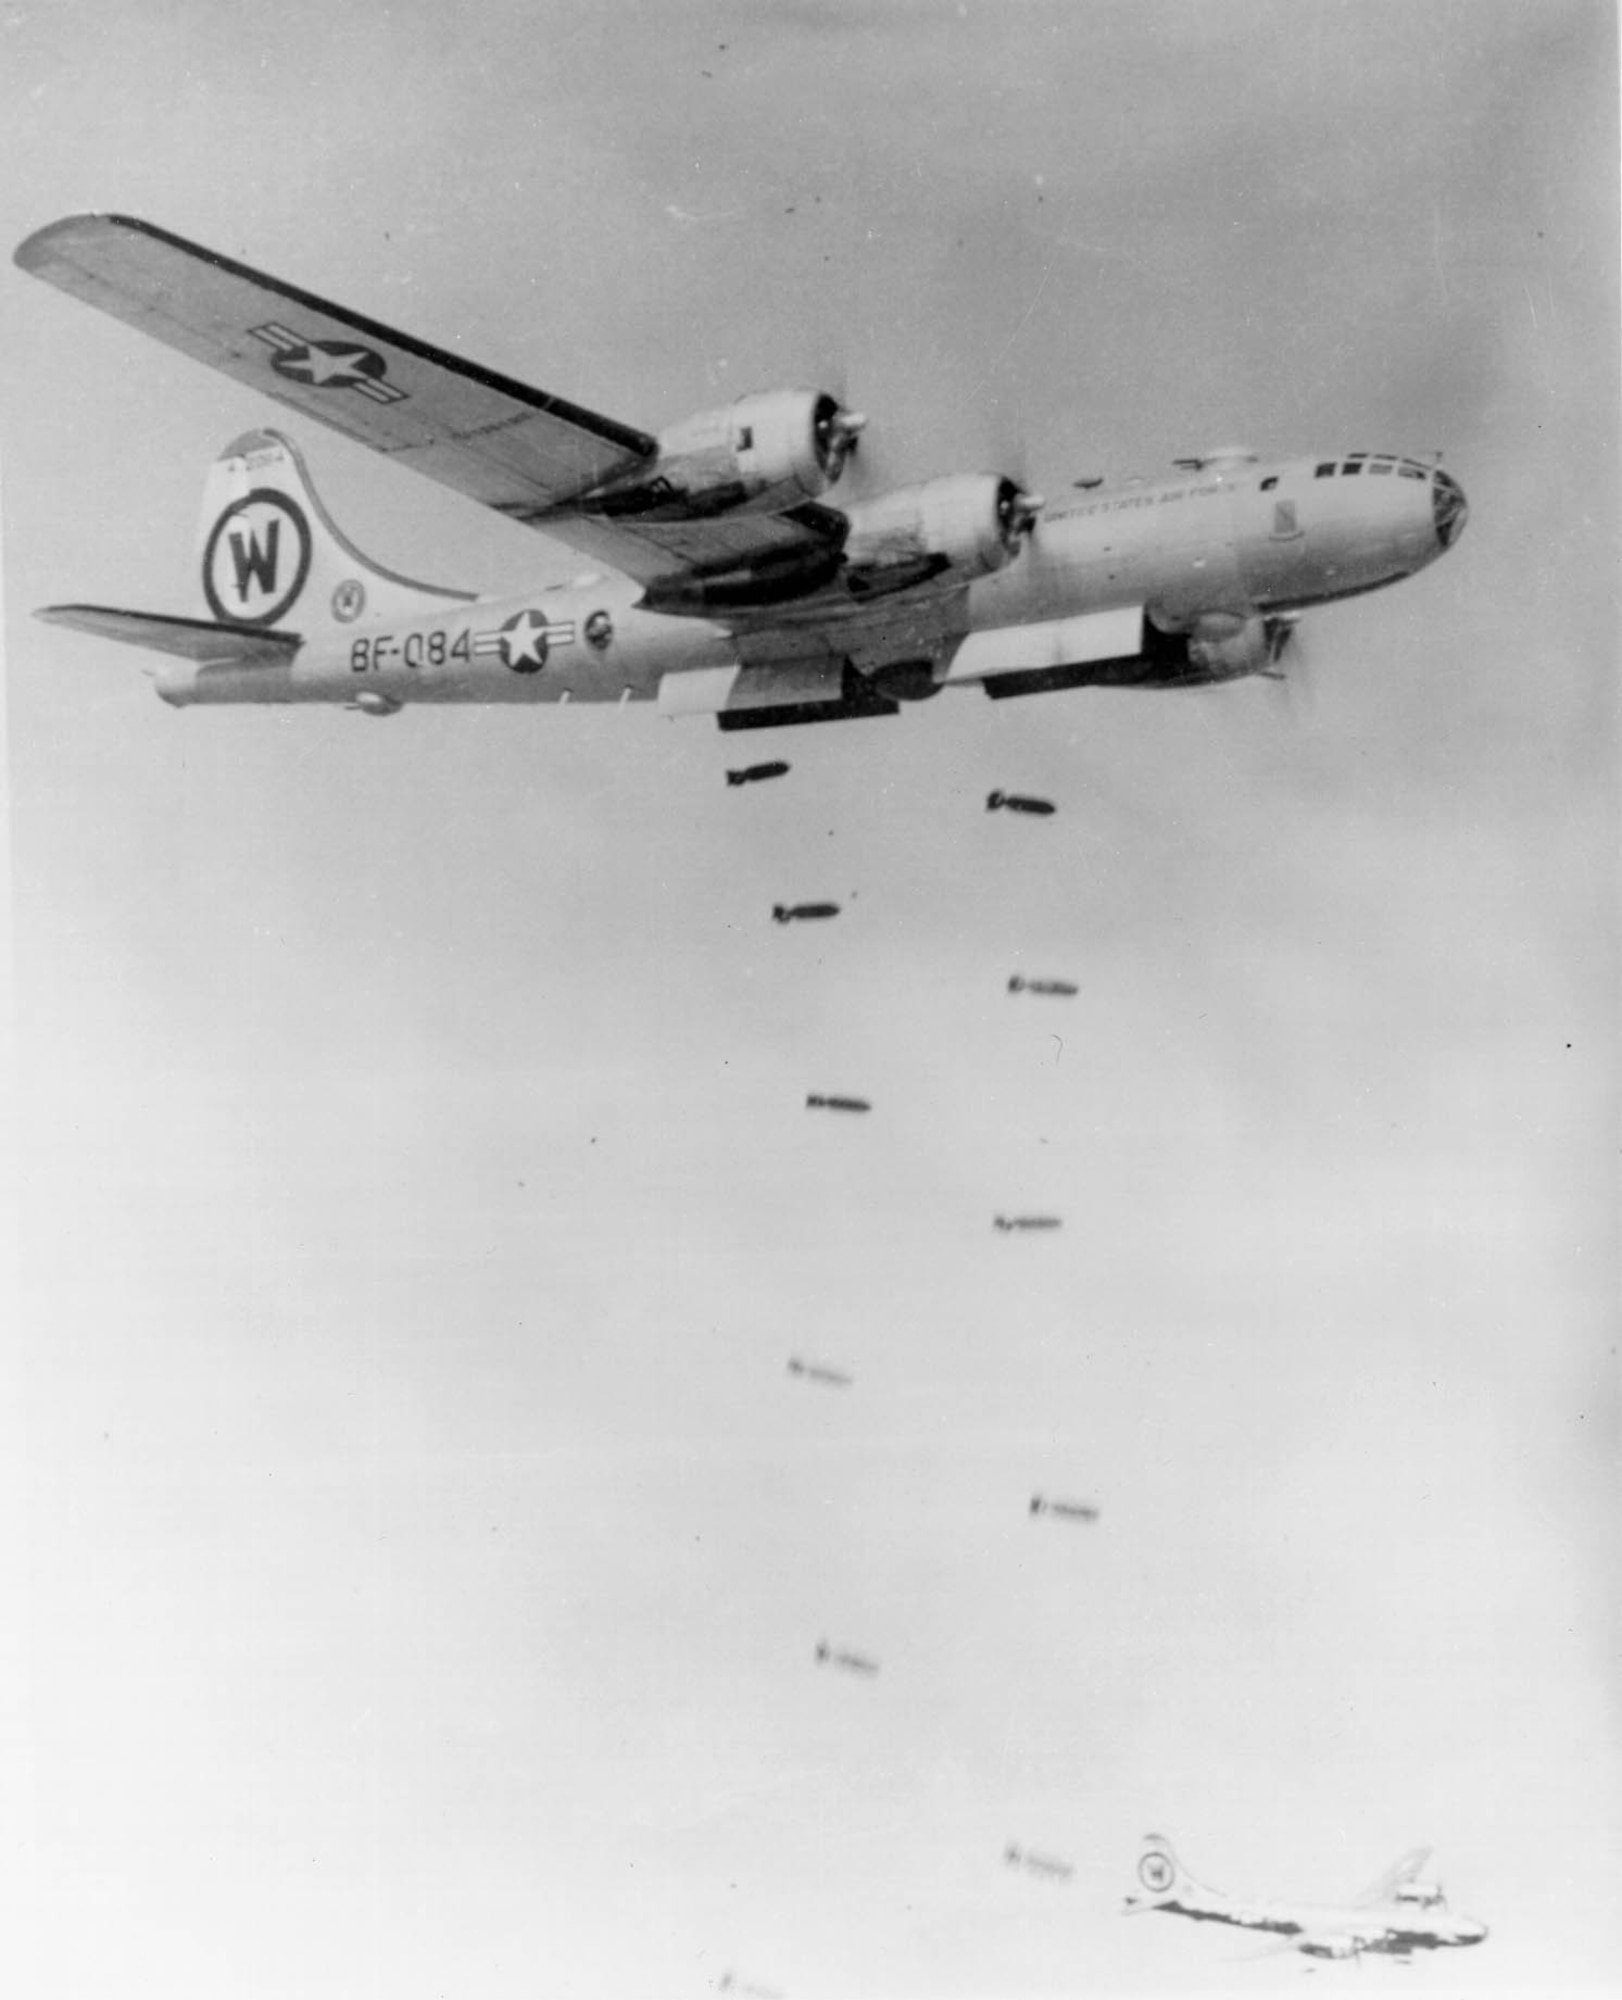 A 92nd Bombardment Wing B-29 drops its bombs on North Korean enemy troop concentrations in 1950.  The 92d’s efforts enabled the U.S. Eighth Army to break out of the Pusan Perimeter and rapidly advance to Seoul. (Courtesy photo)